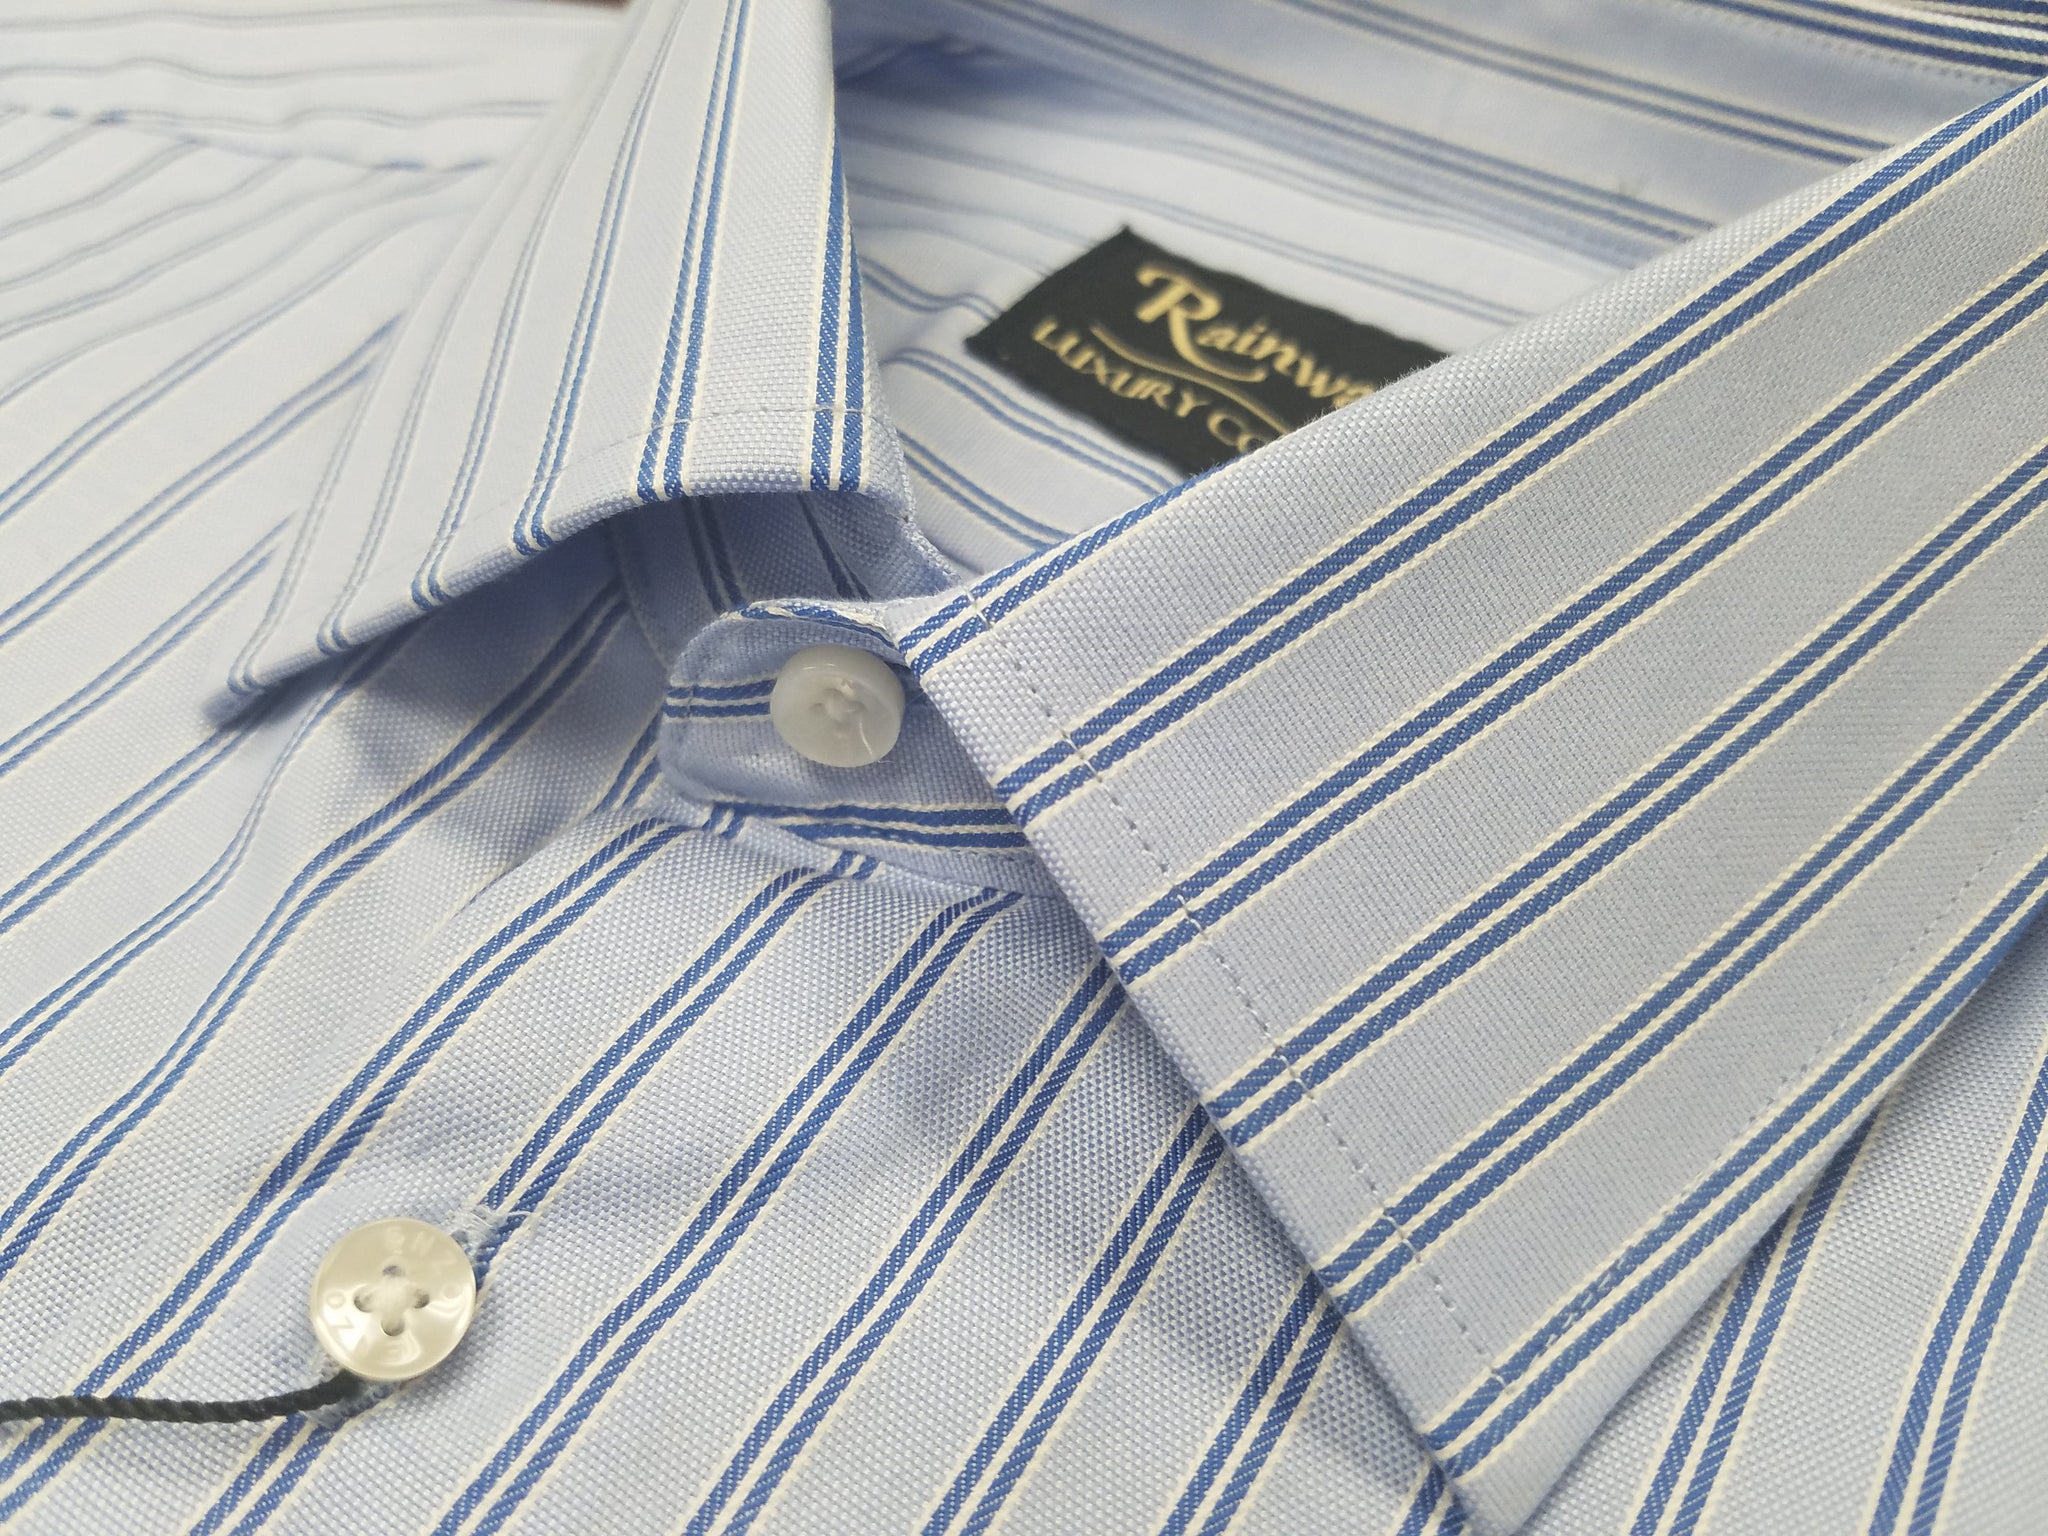 Rainwater's Luxury Collection 100% Cotton Blue Stripe French Cuff Dress Shirt - Rainwater's Men's Clothing and Tuxedo Rental